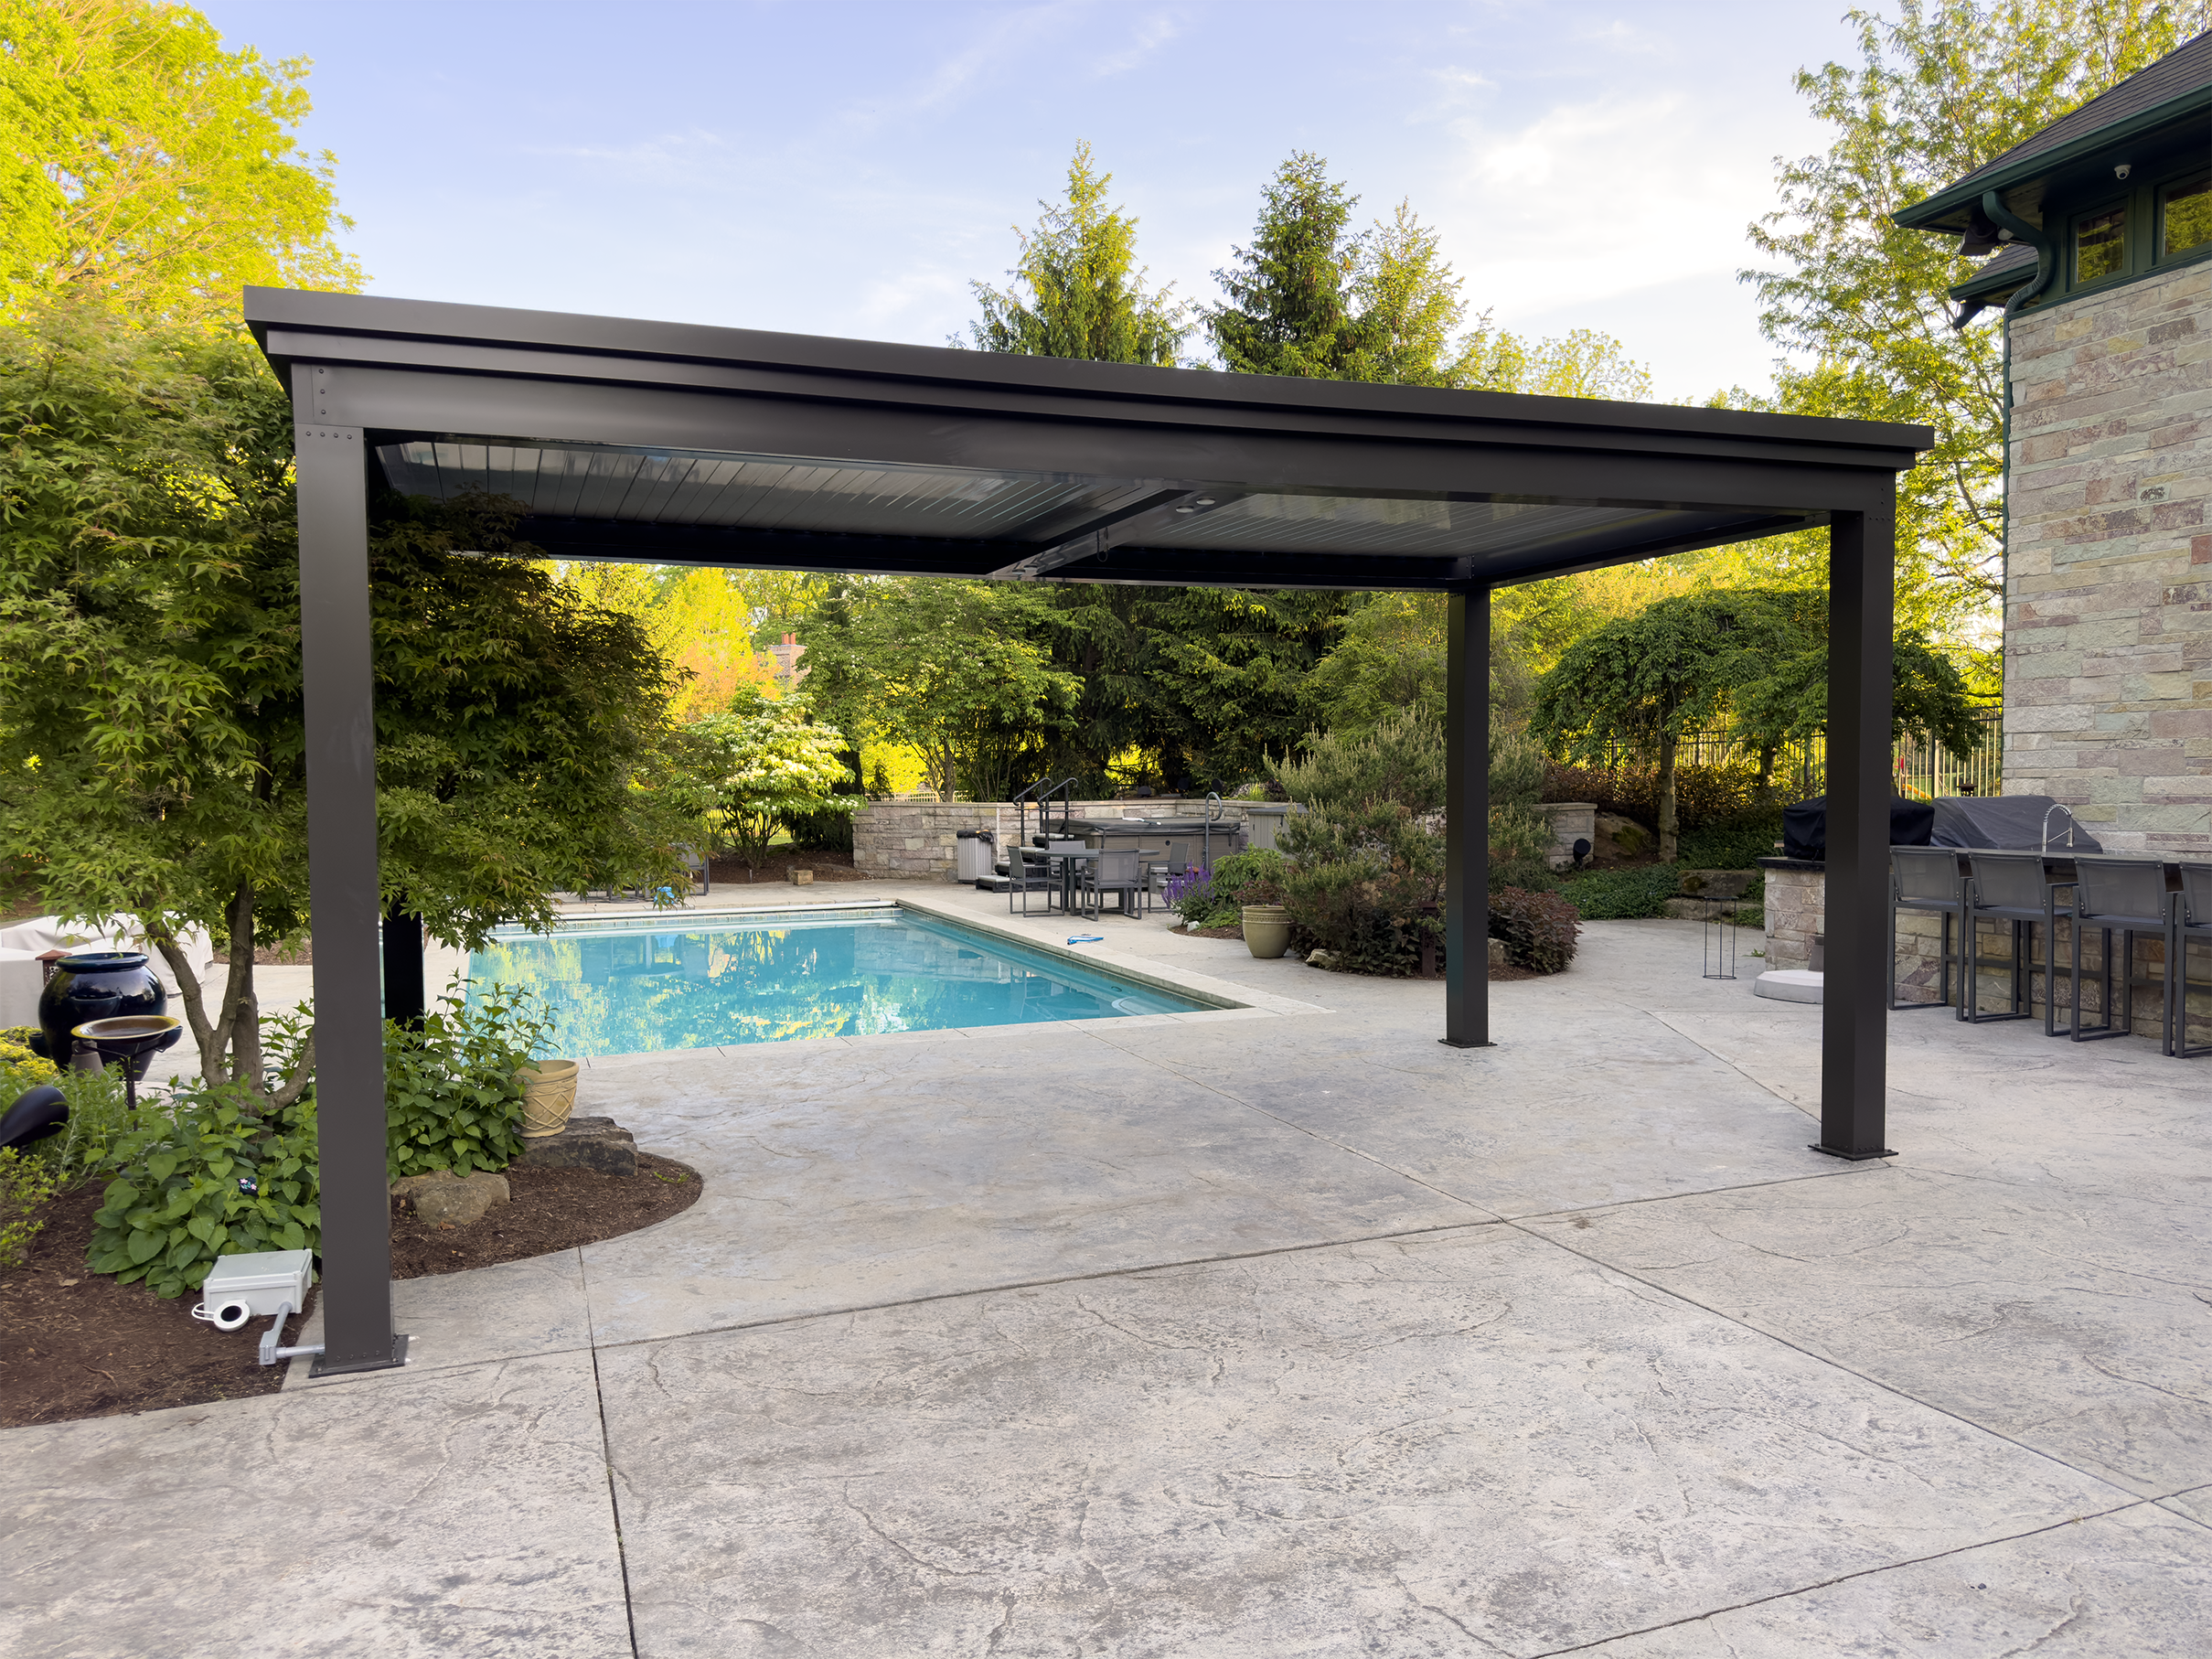 Pergola Ideas for backyard. Brown structure for patios.